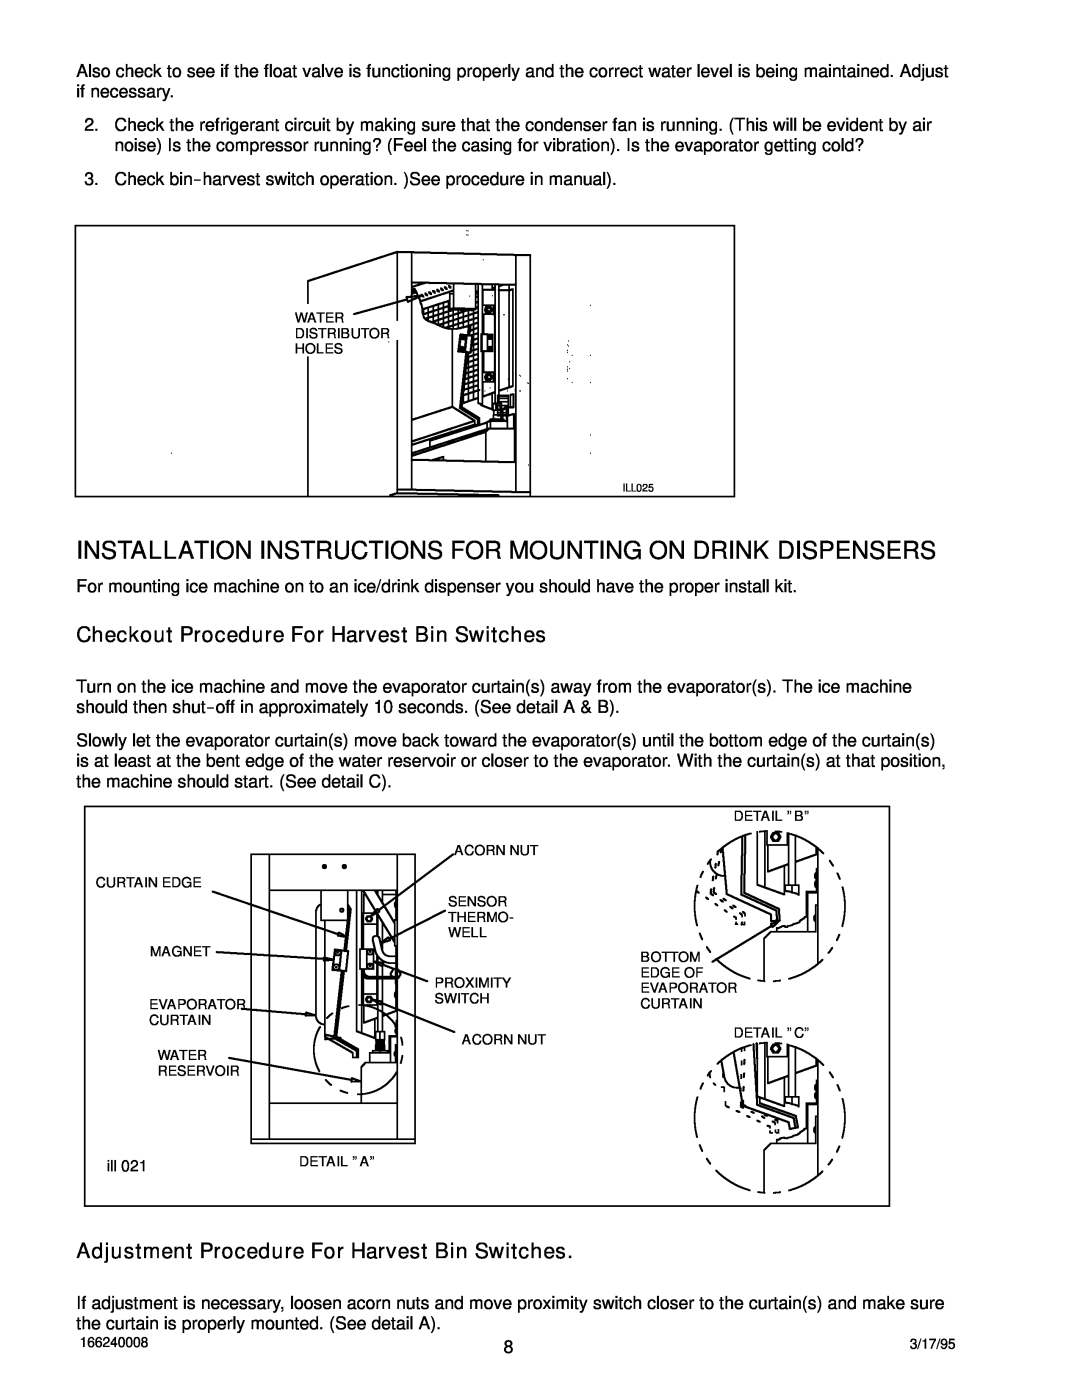 Cornelius 322 Installation Instructions For Mounting On Drink Dispensers, Checkout Procedure For Harvest Bin Switches 